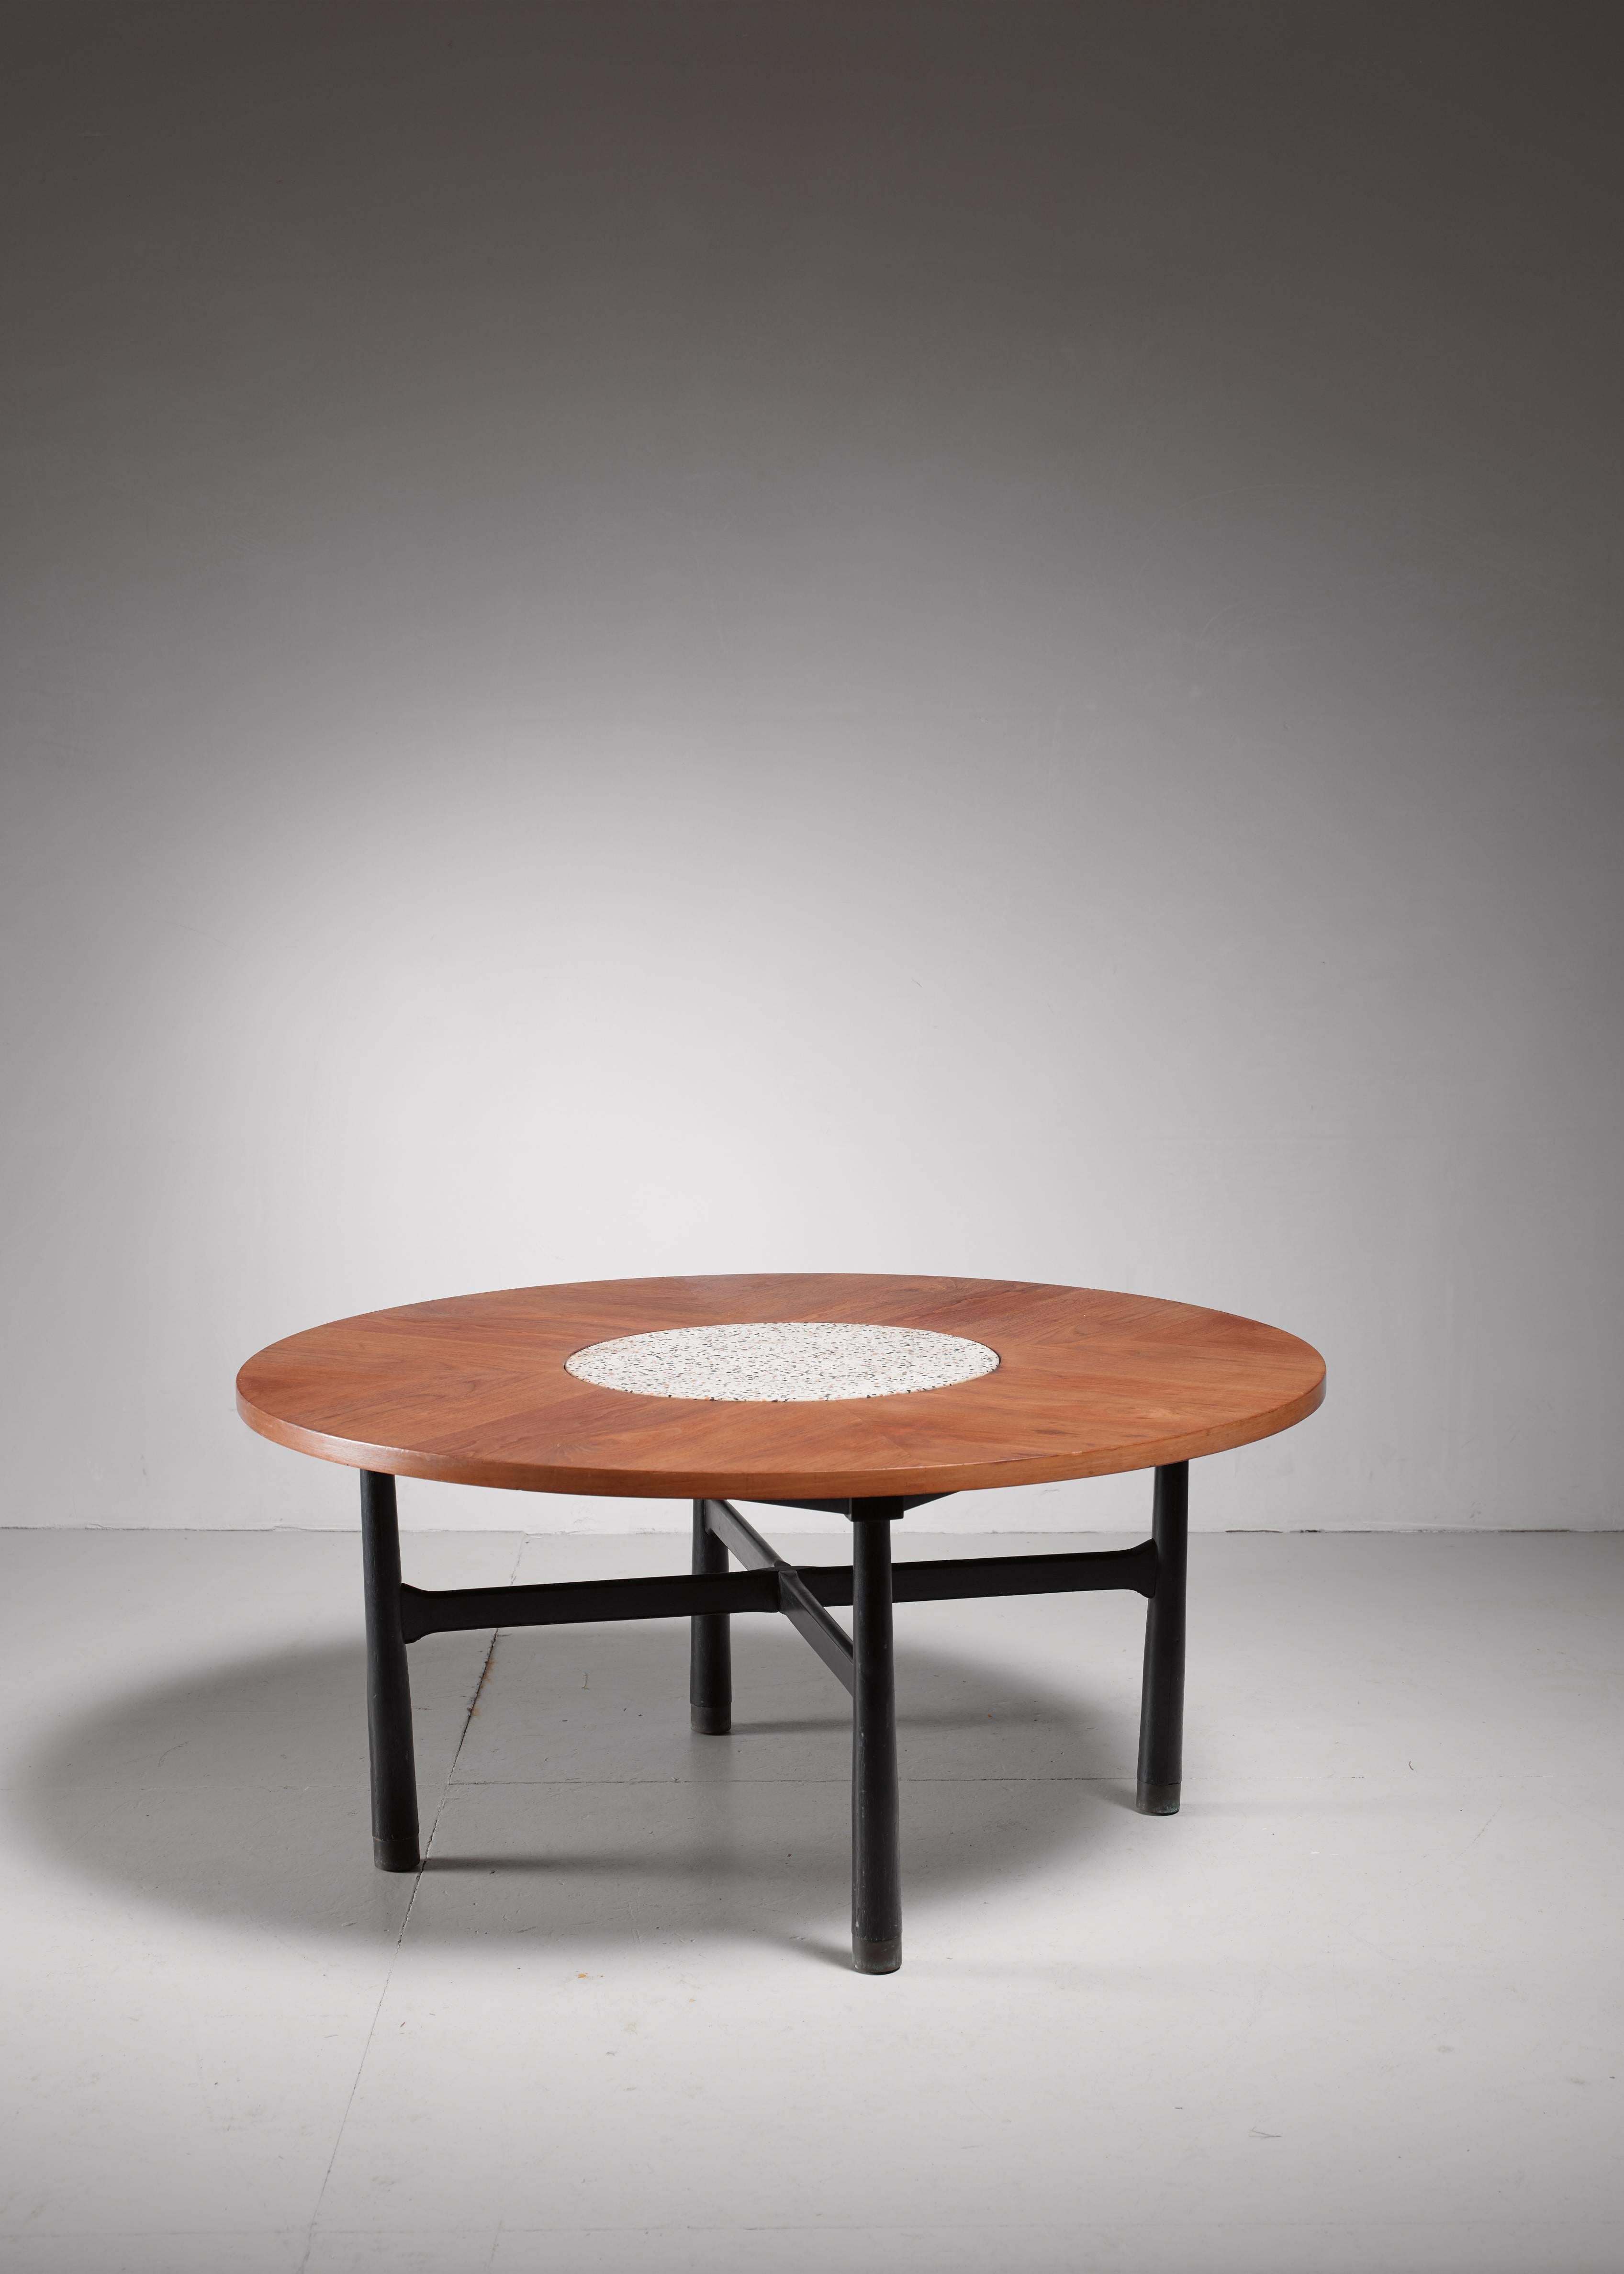 A round Harvey Probber coffee table. The walnut top rests on an ebonized wooden base with copper socks and a terrazzo stone circle in the centre.